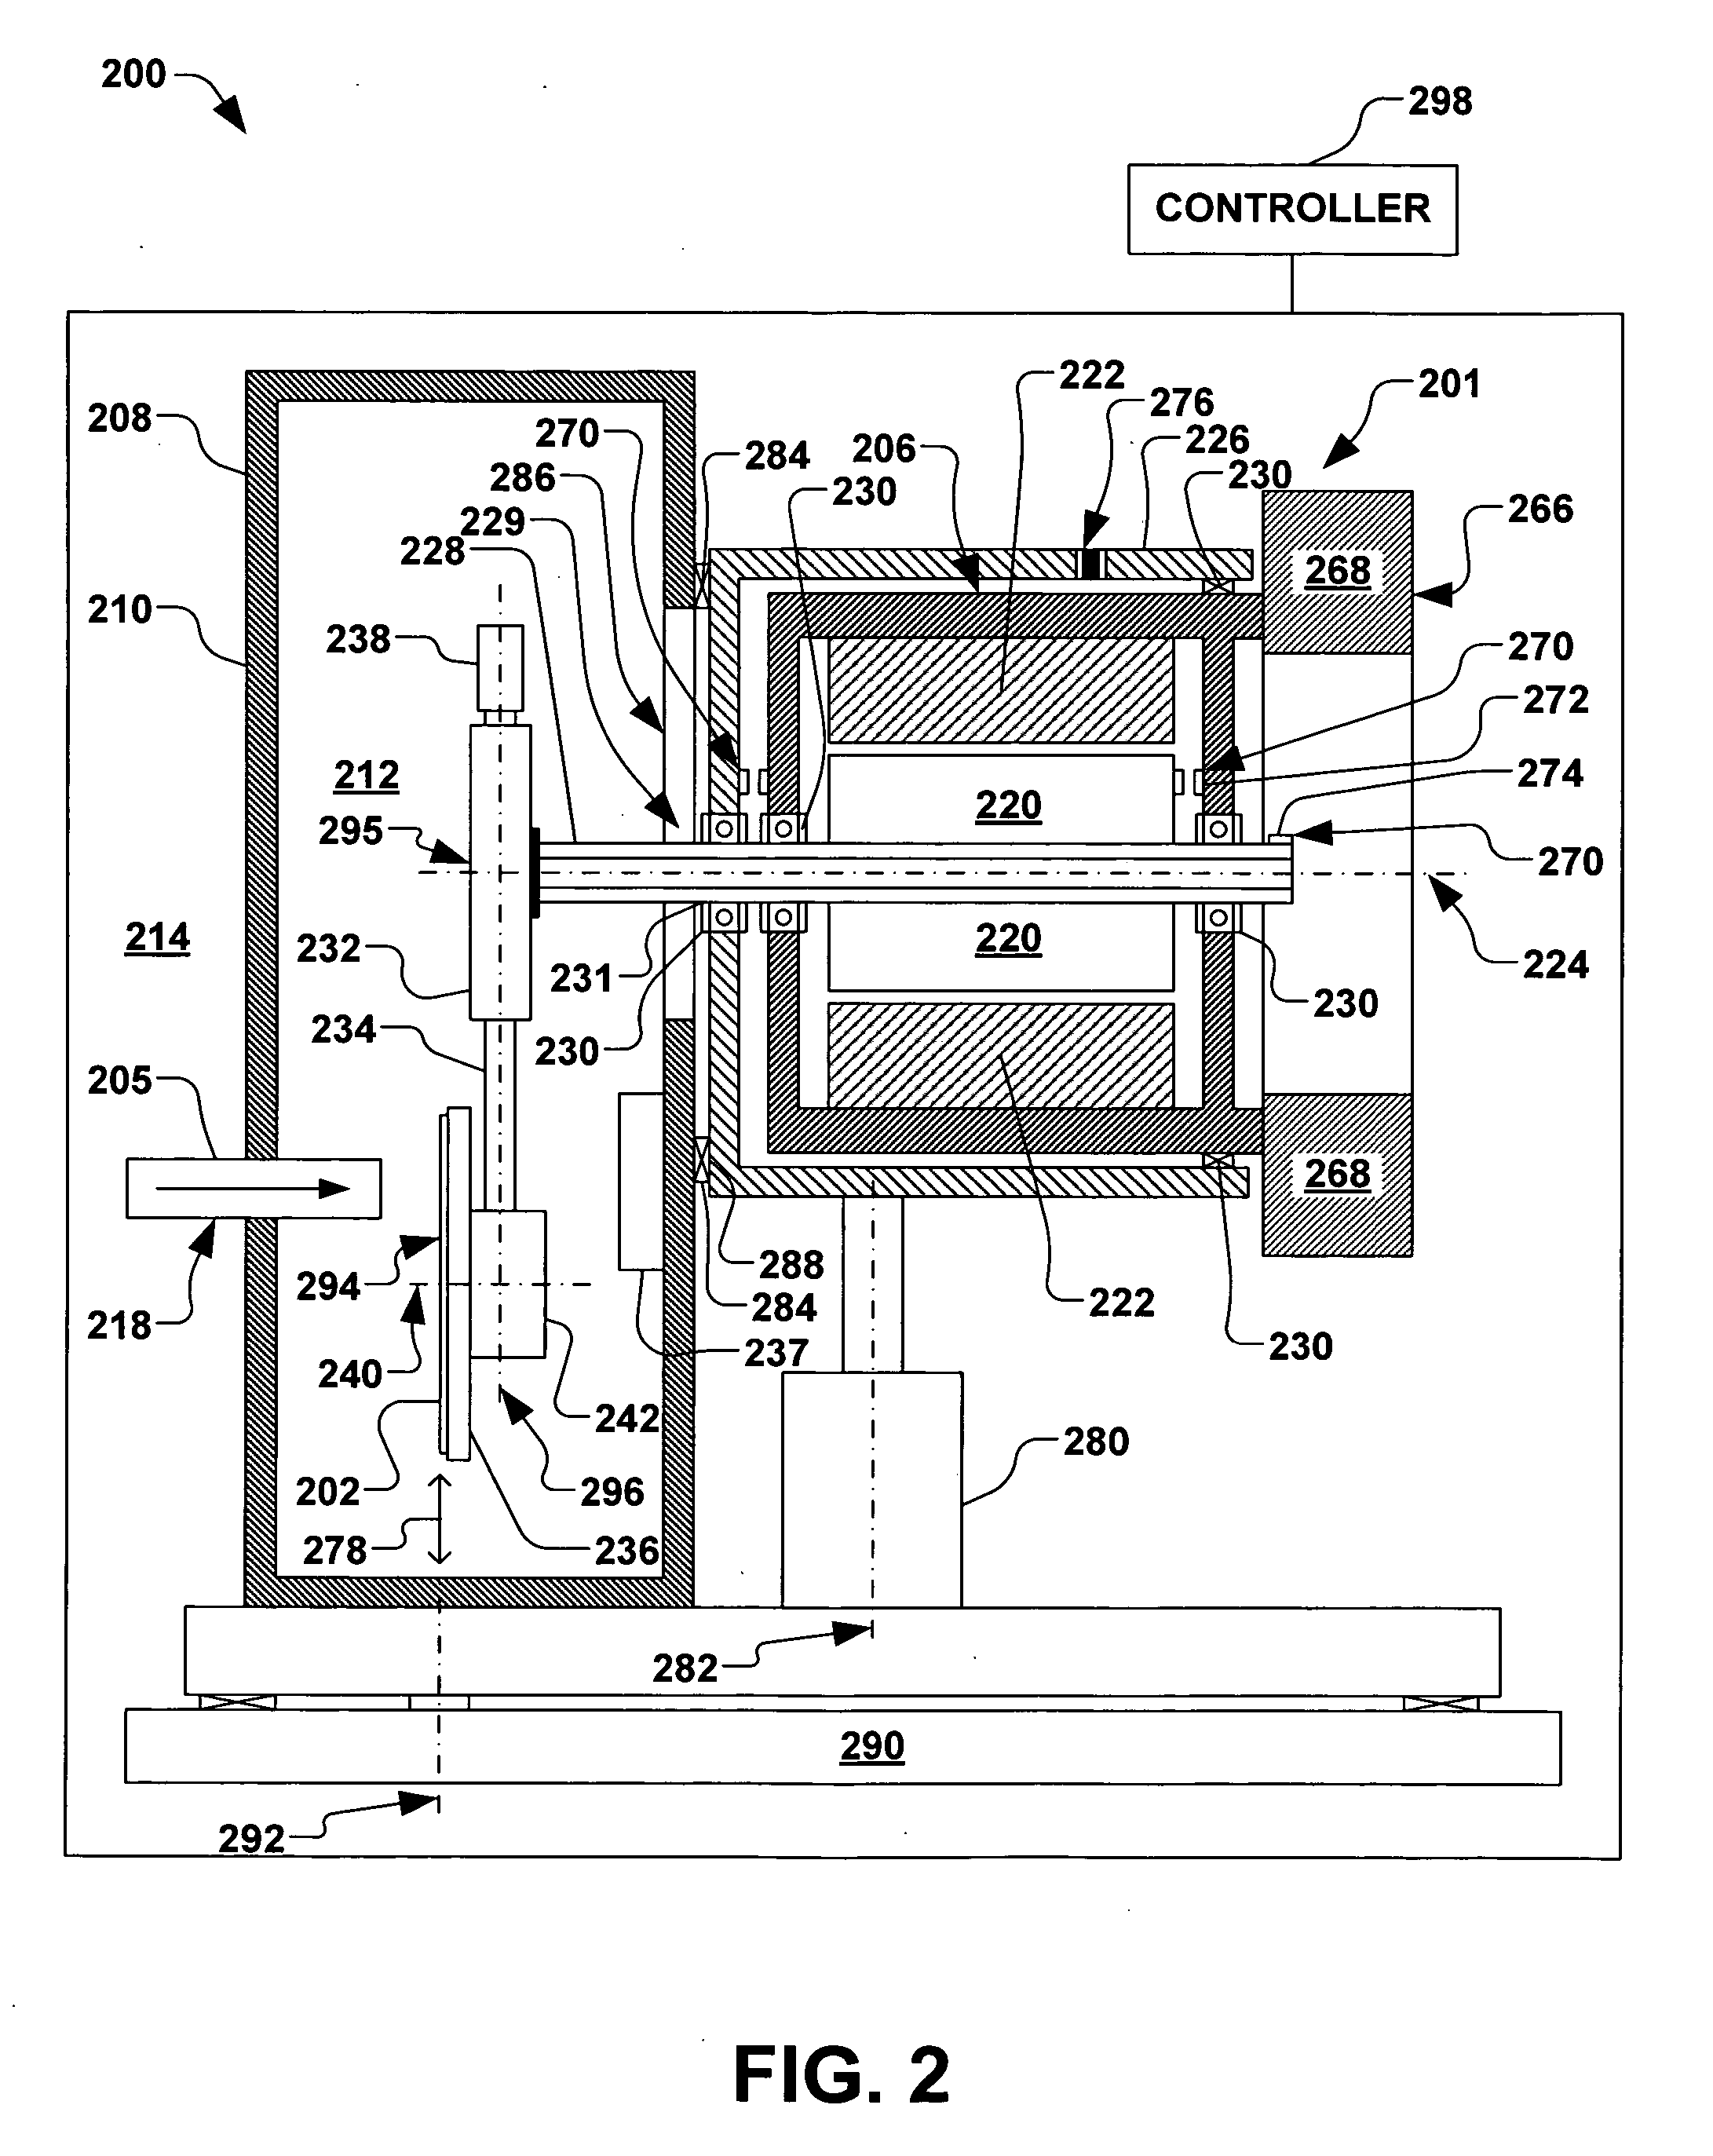 Reciprocating drive for scanning a workpiece through an ion beam